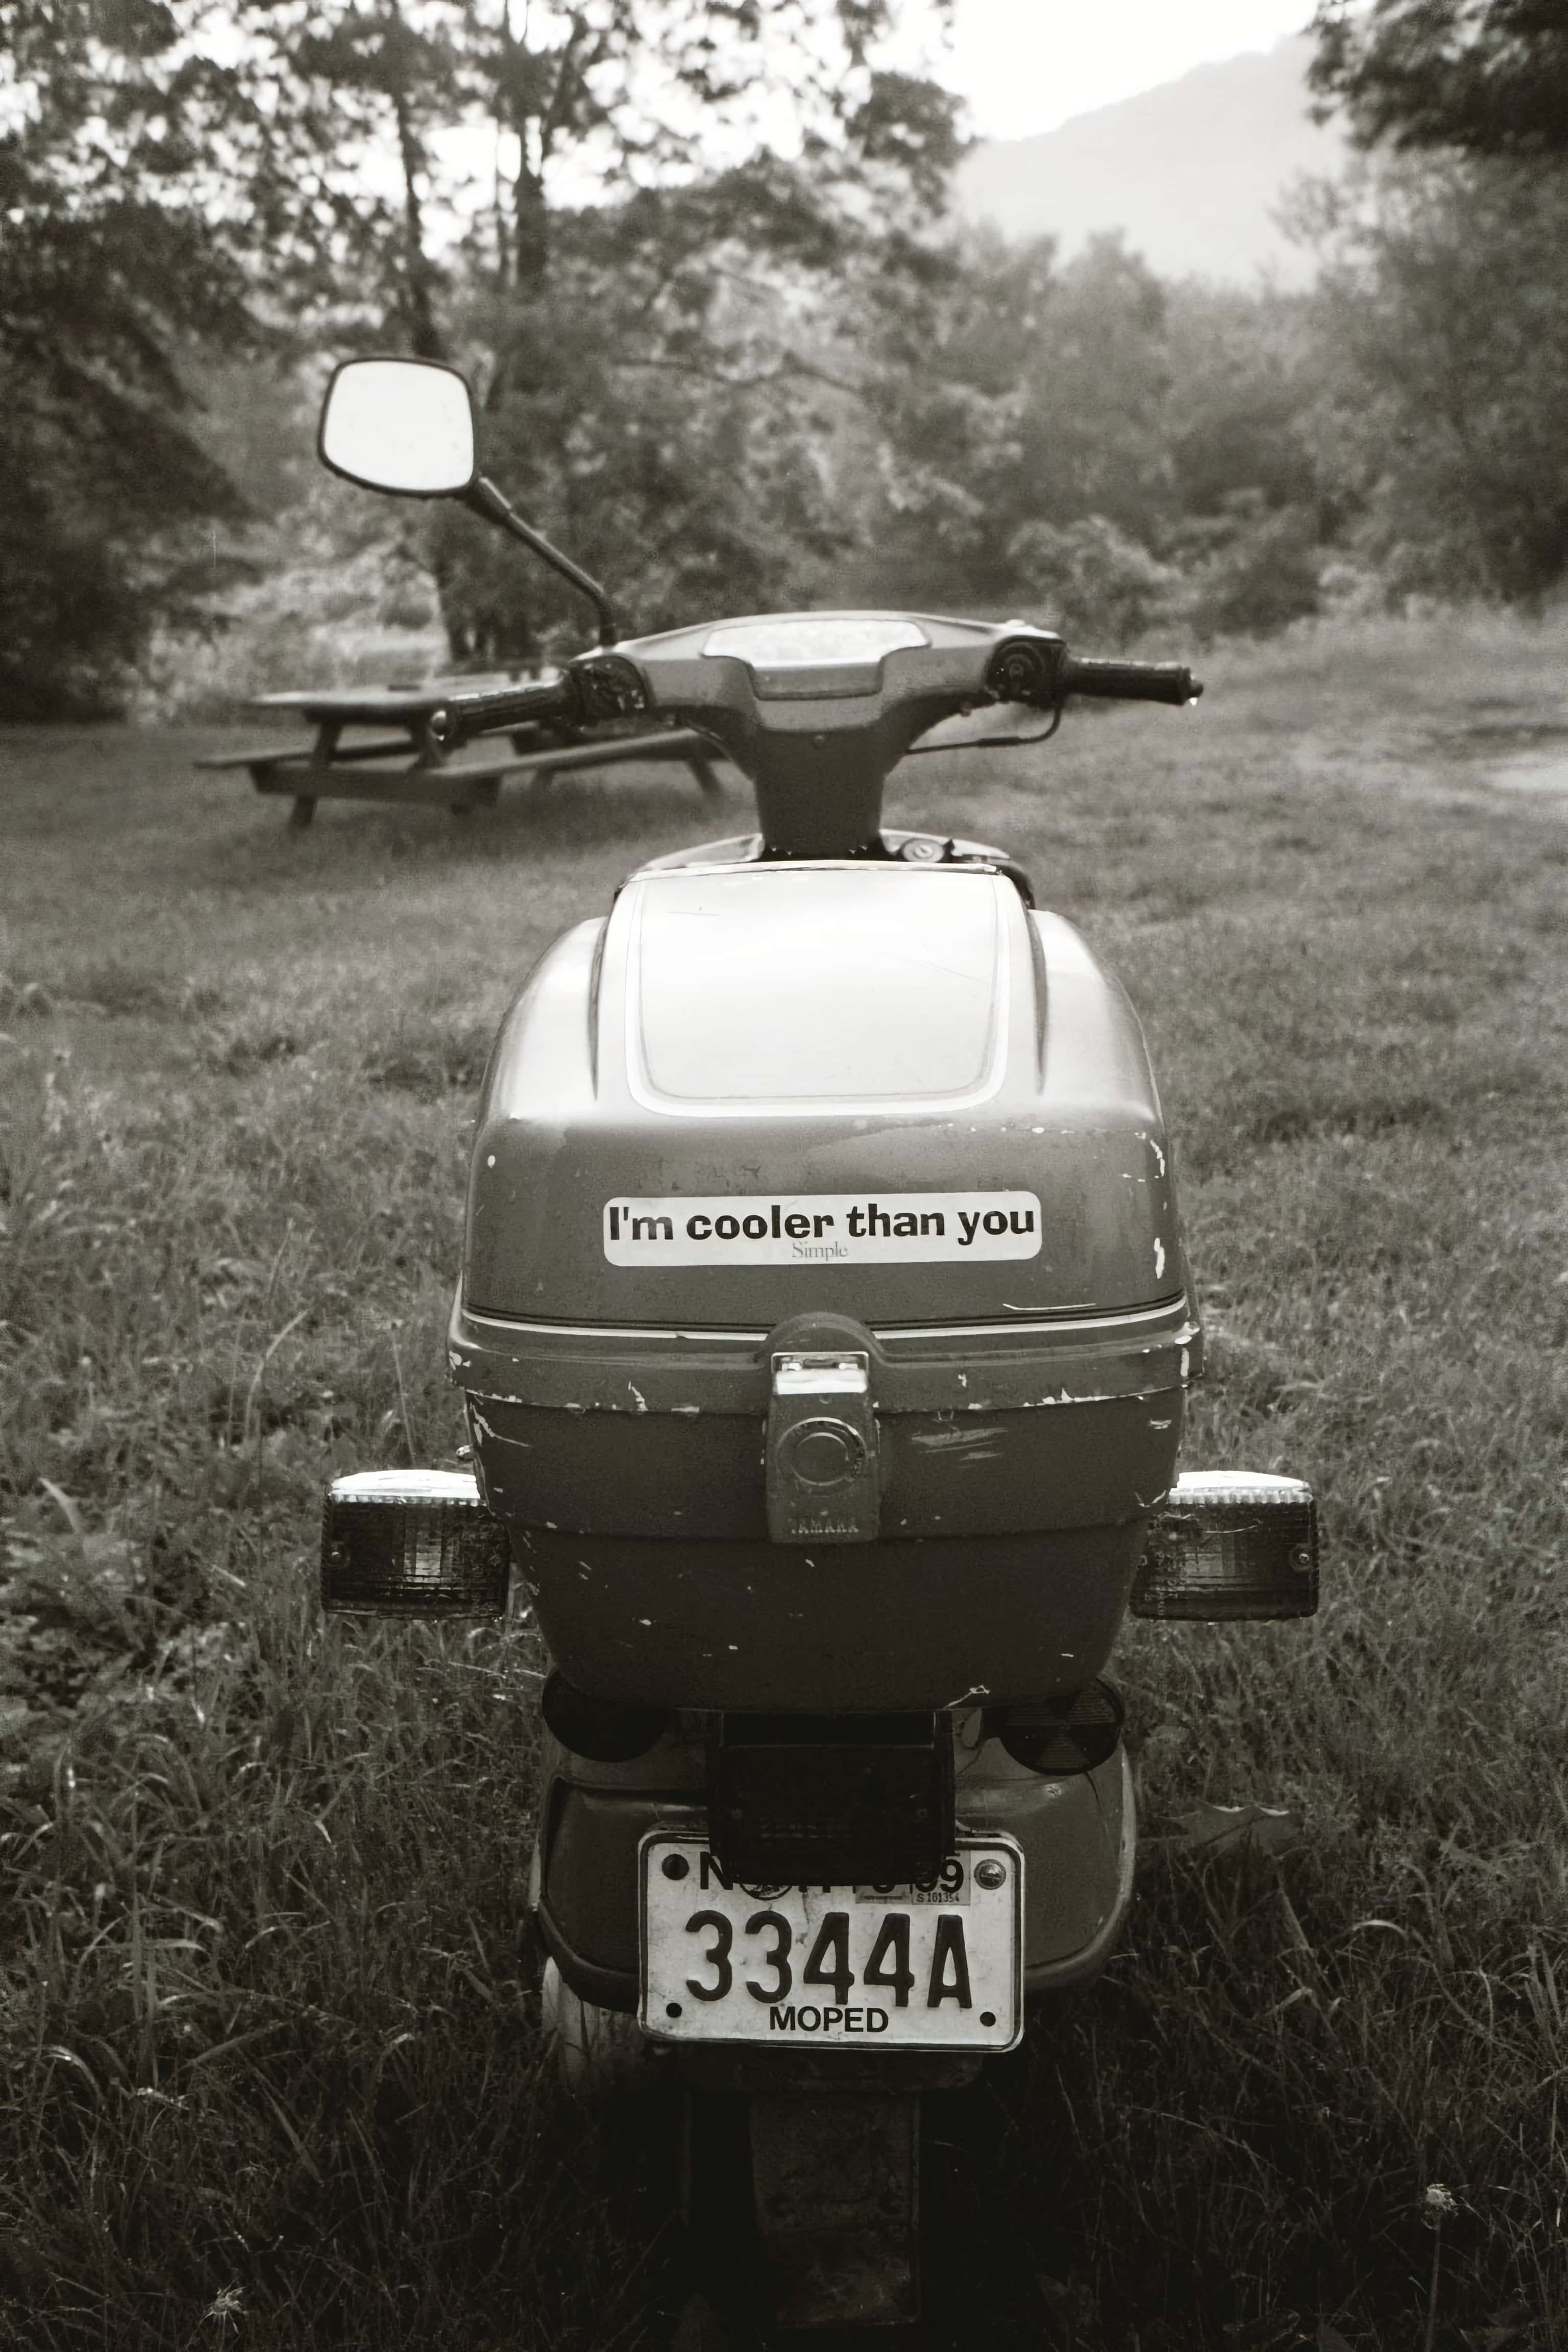 The Old Scooter. Source.